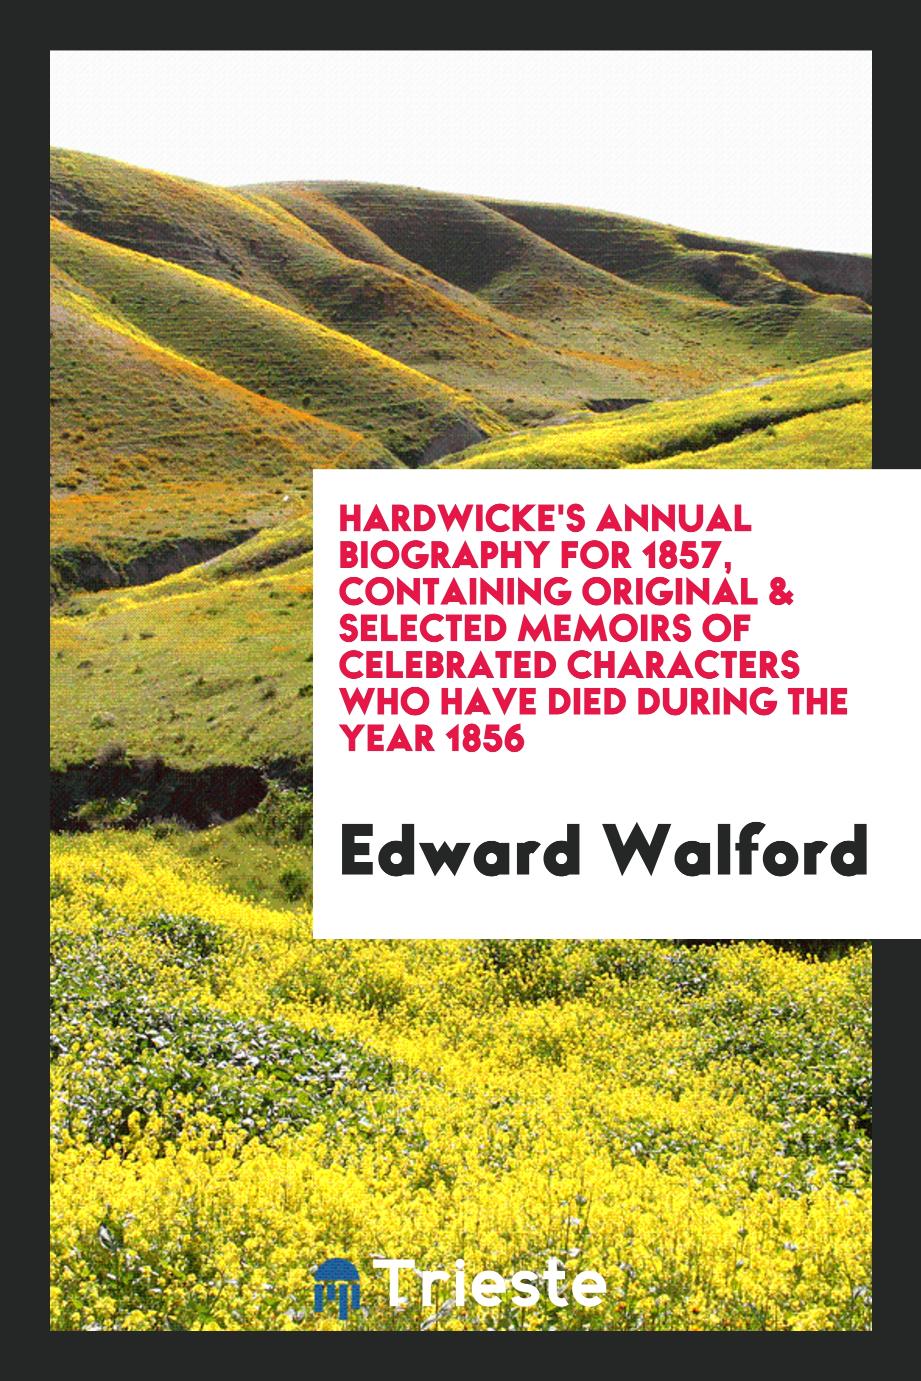 Hardwicke's Annual Biography for 1857, Containing Original & Selected Memoirs of Celebrated Characters Who Have Died During the Year 1856